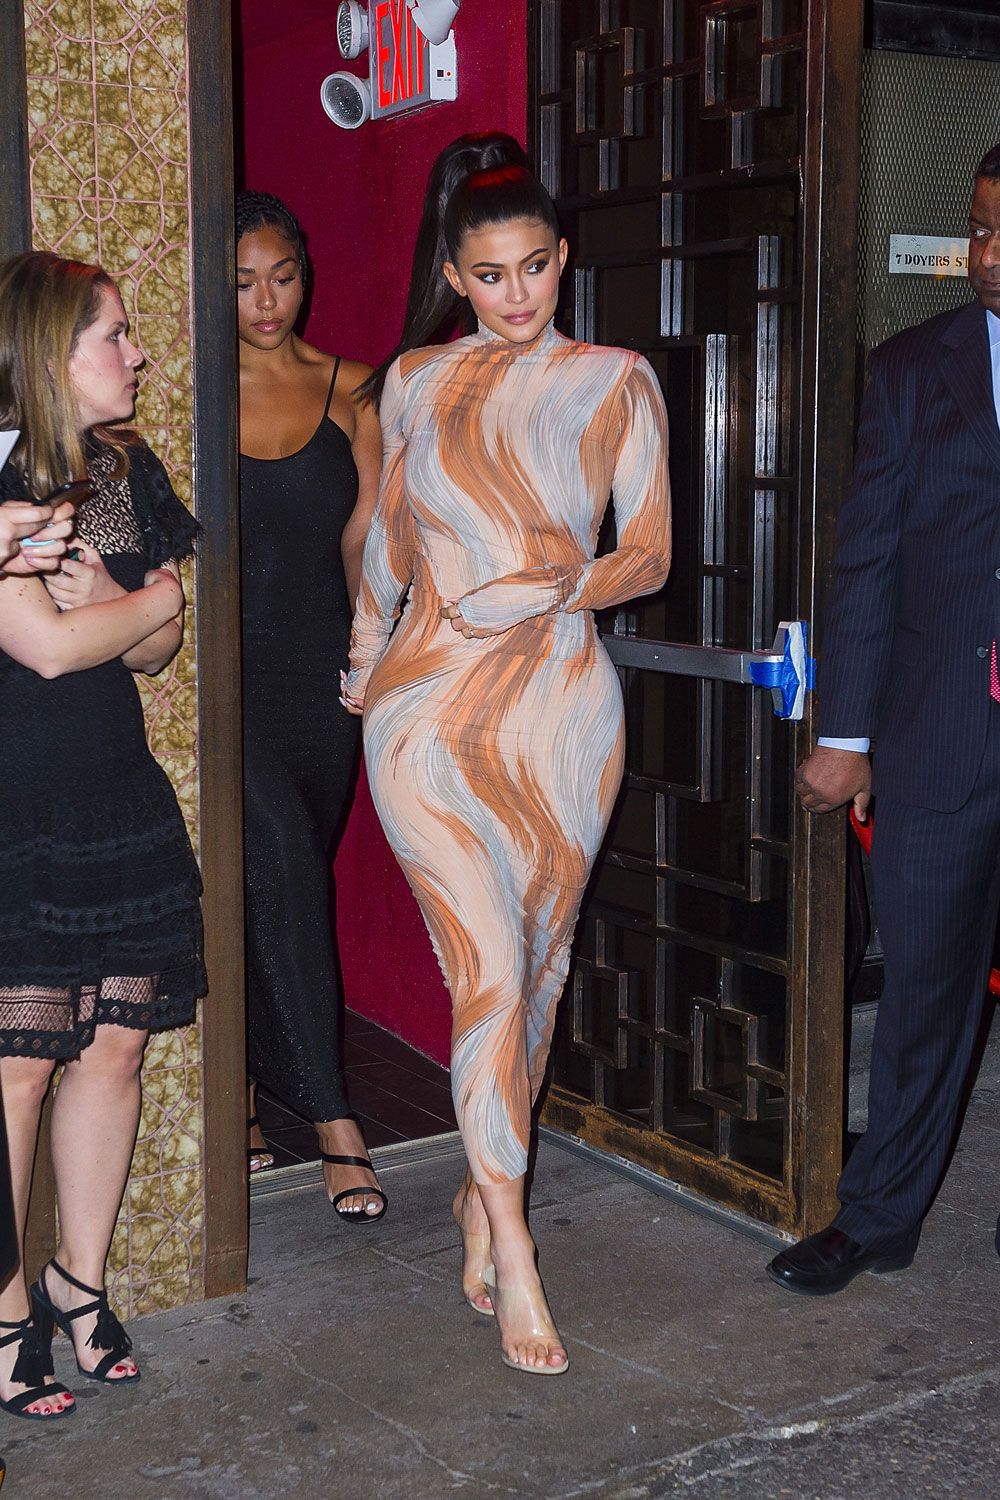 Kylie Jenner just wore a dress that's so tight it's a wonder she's